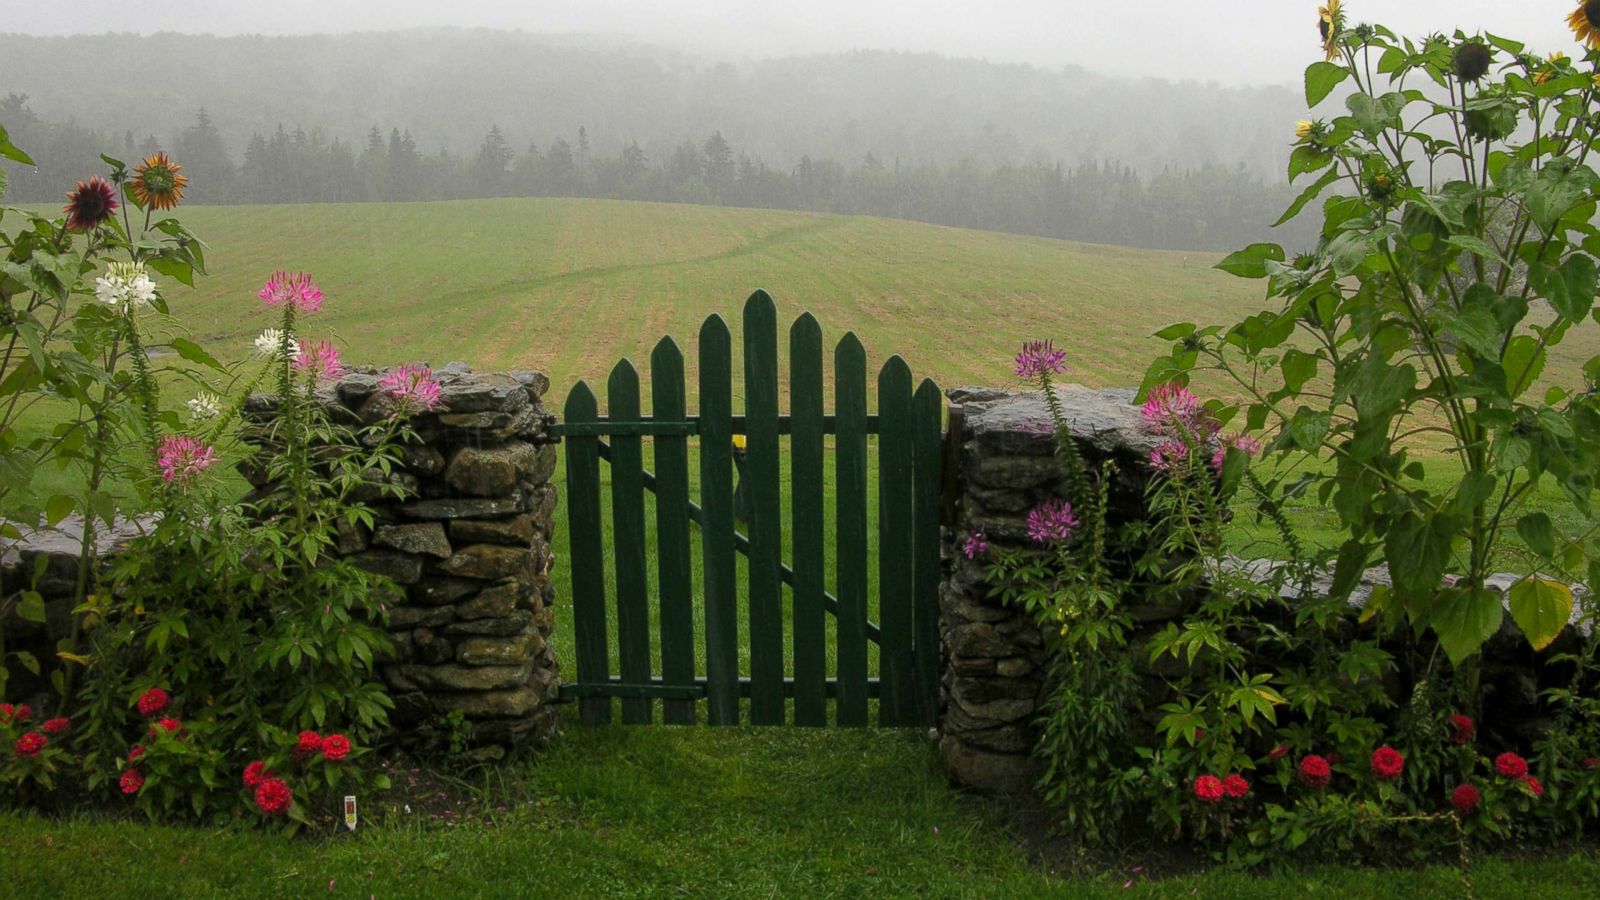 PHOTO: Summer flowers along a stone garden wall with wooden green picket gate leading to a green hillside field in Ripton, Vermont are pictured this undated stock photo.